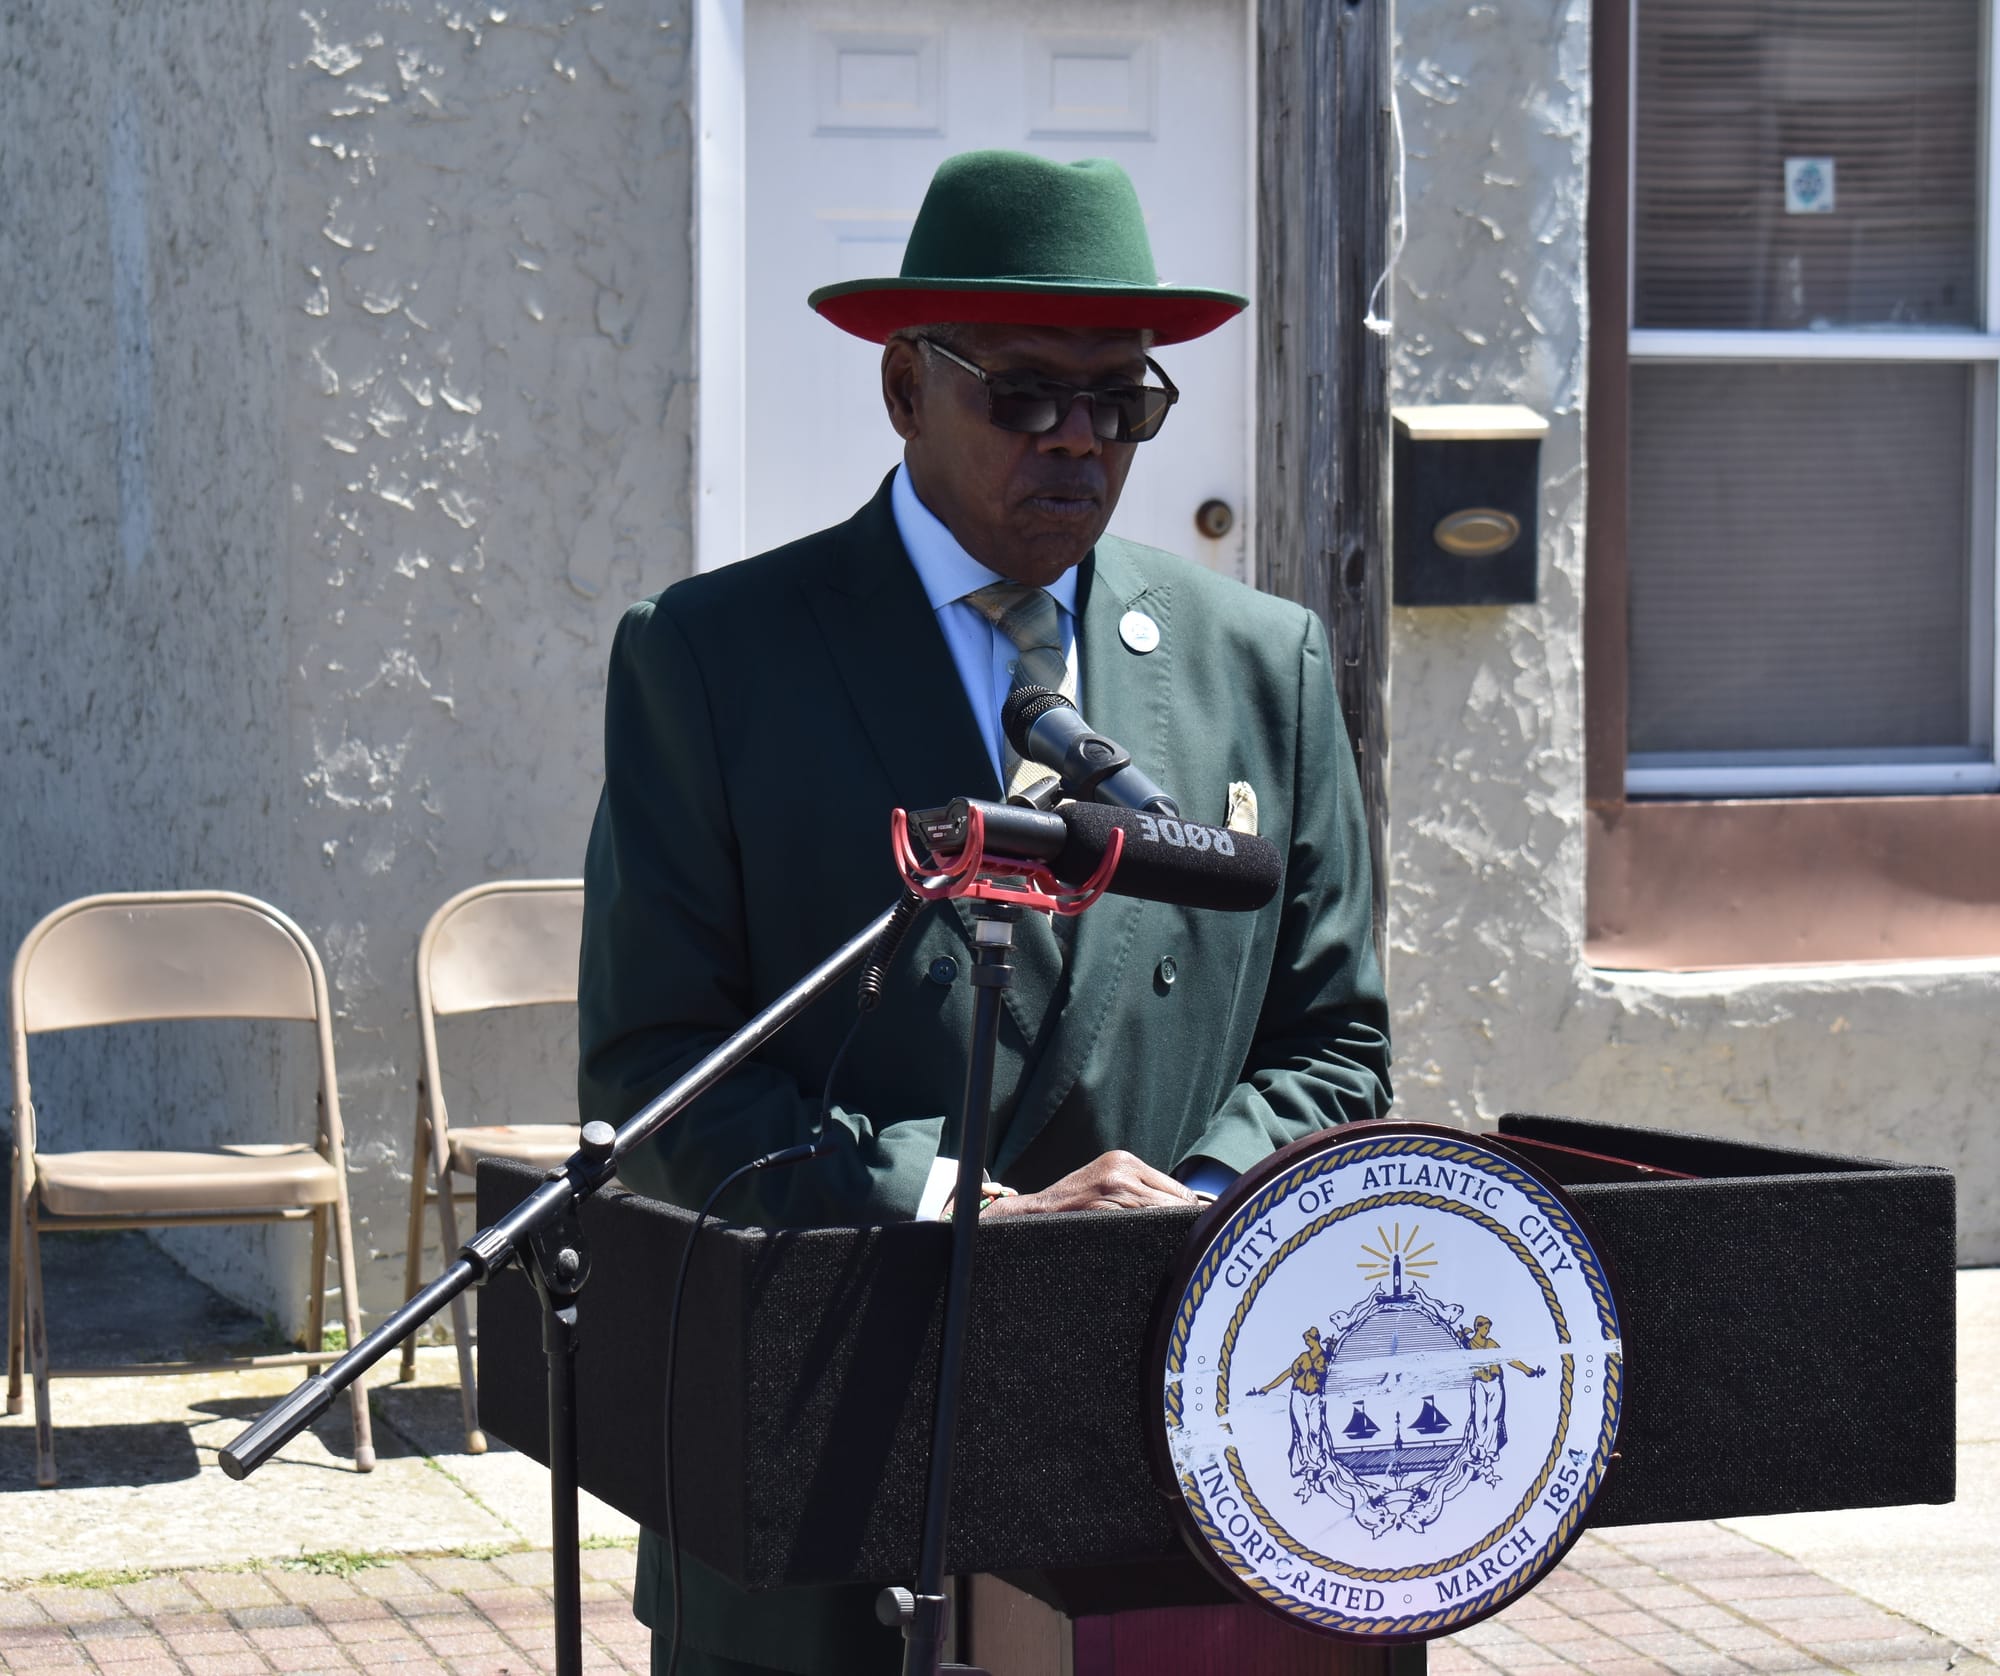 The City Of Atlantic City Renames Street After The Late Dr. Juanita High